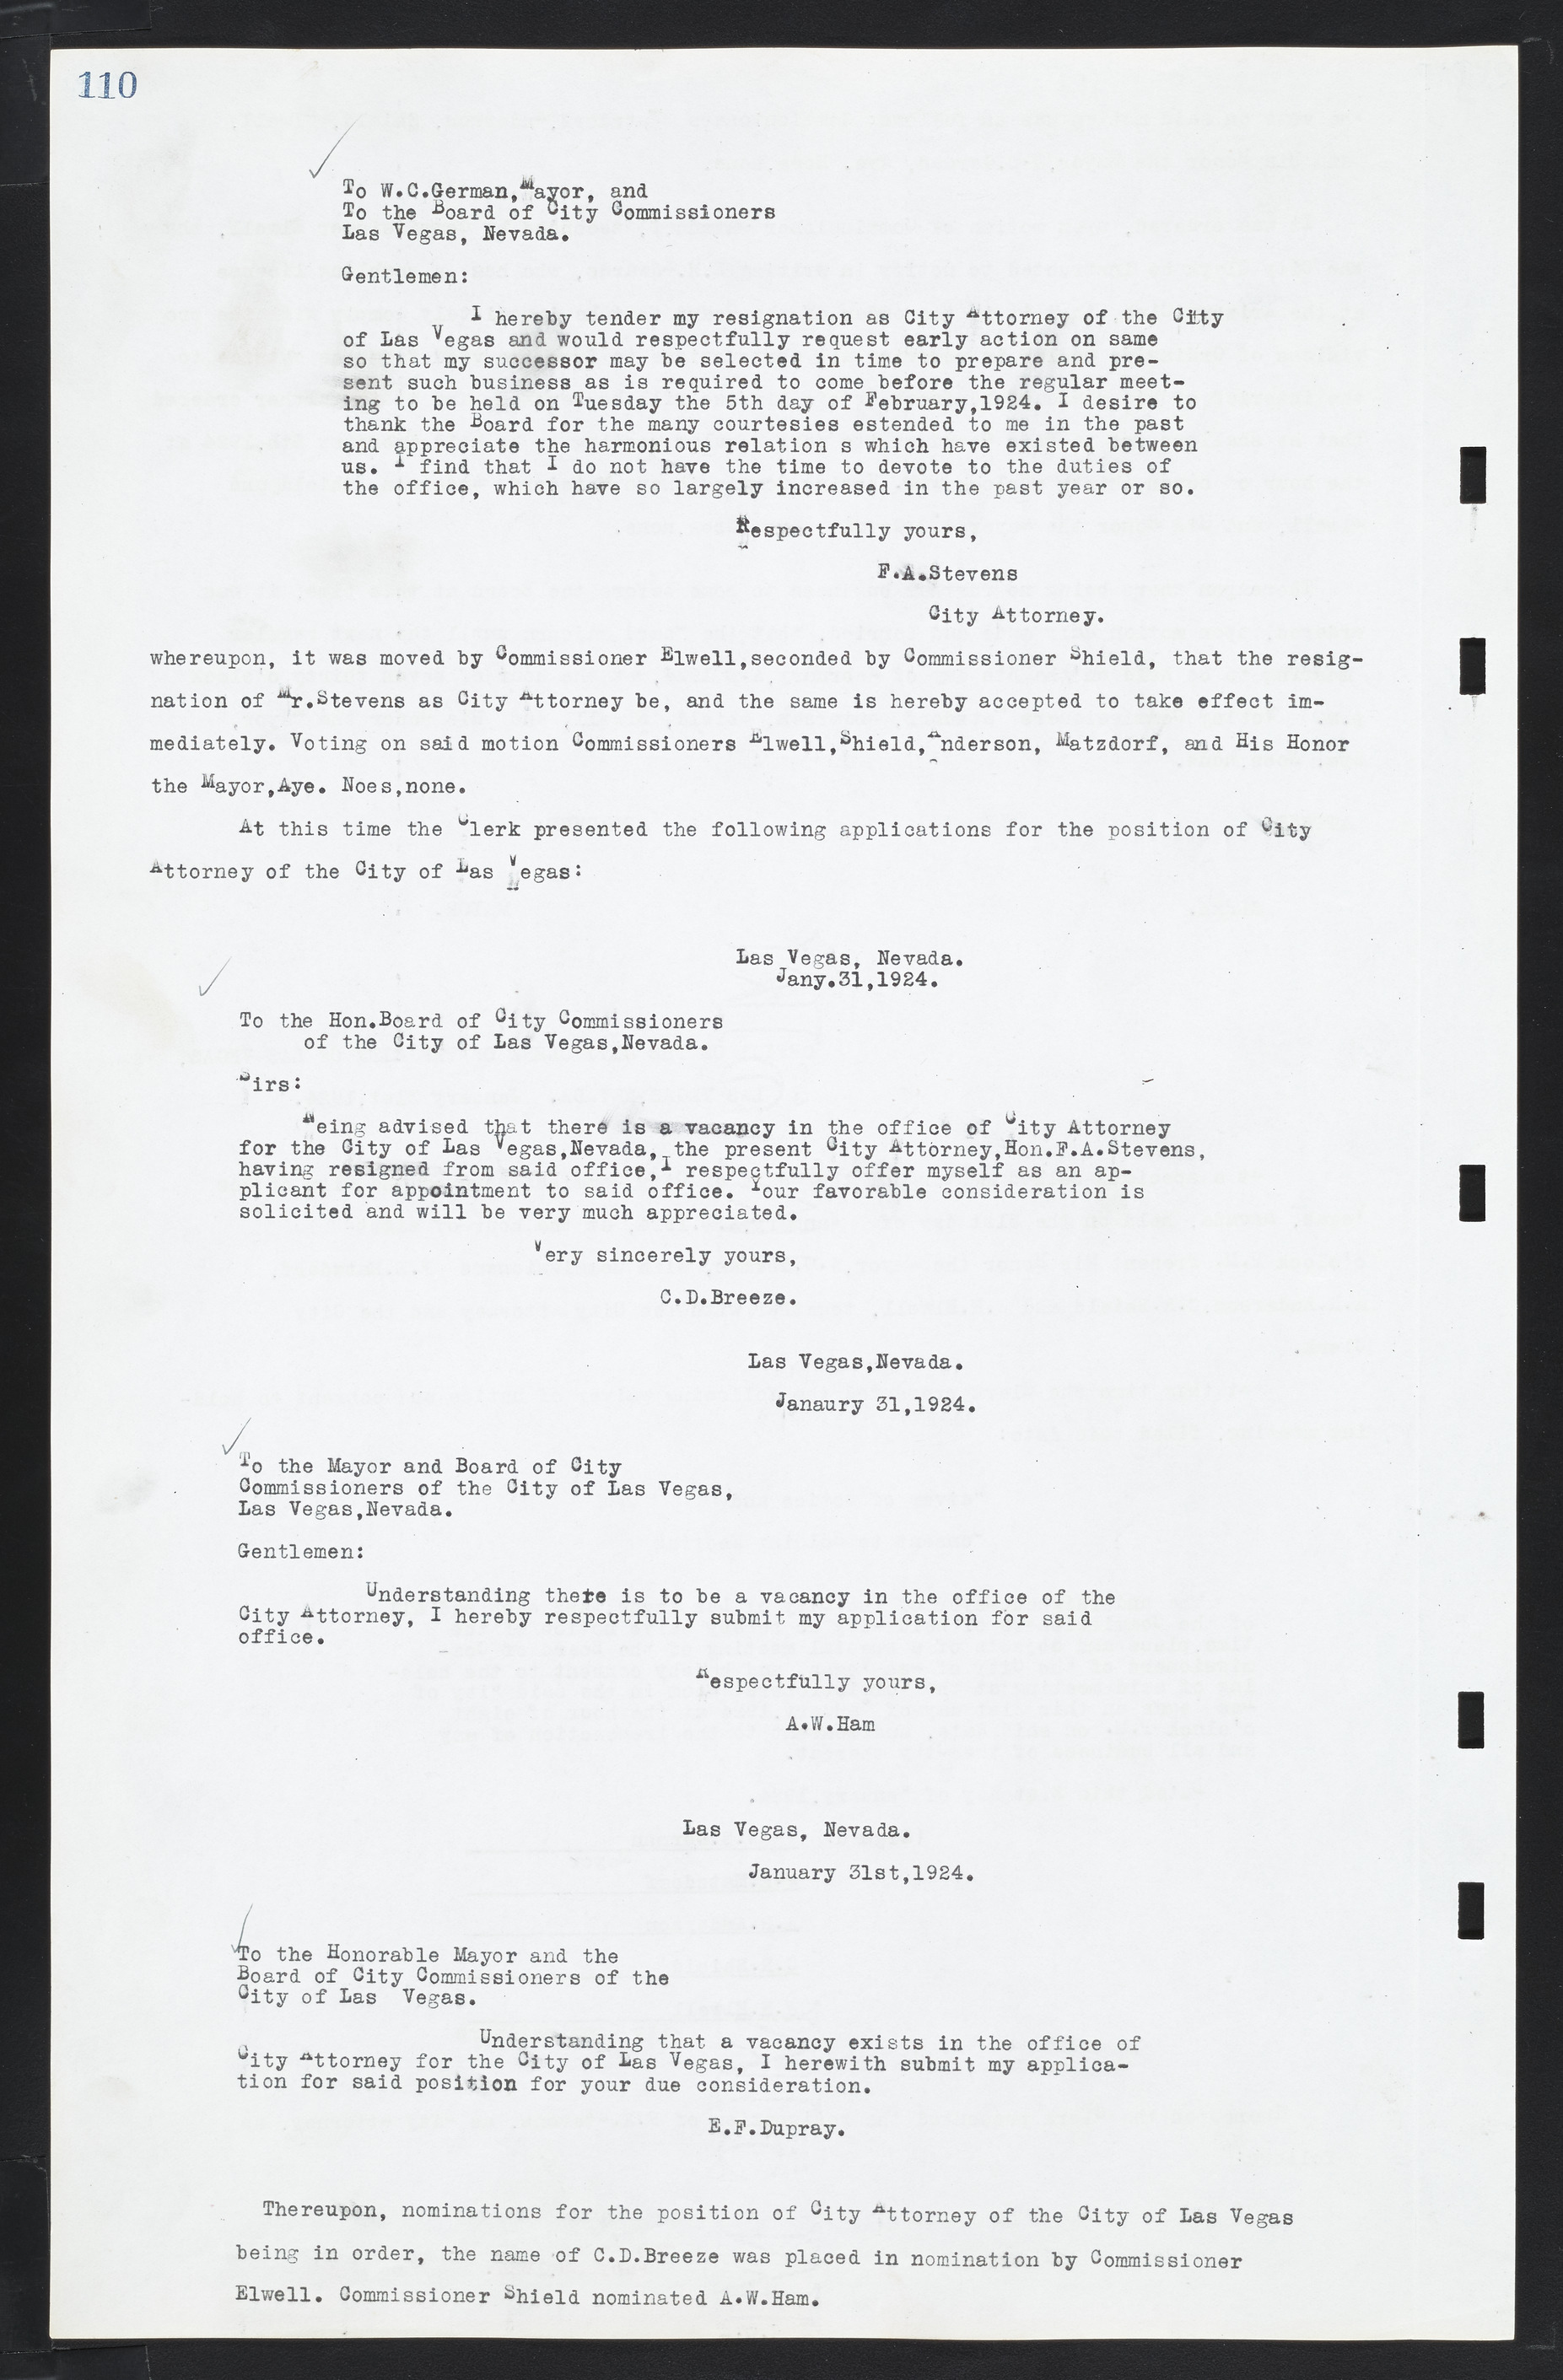 Las Vegas City Commission Minutes, March 1, 1922 to May 10, 1929, lvc000002-117